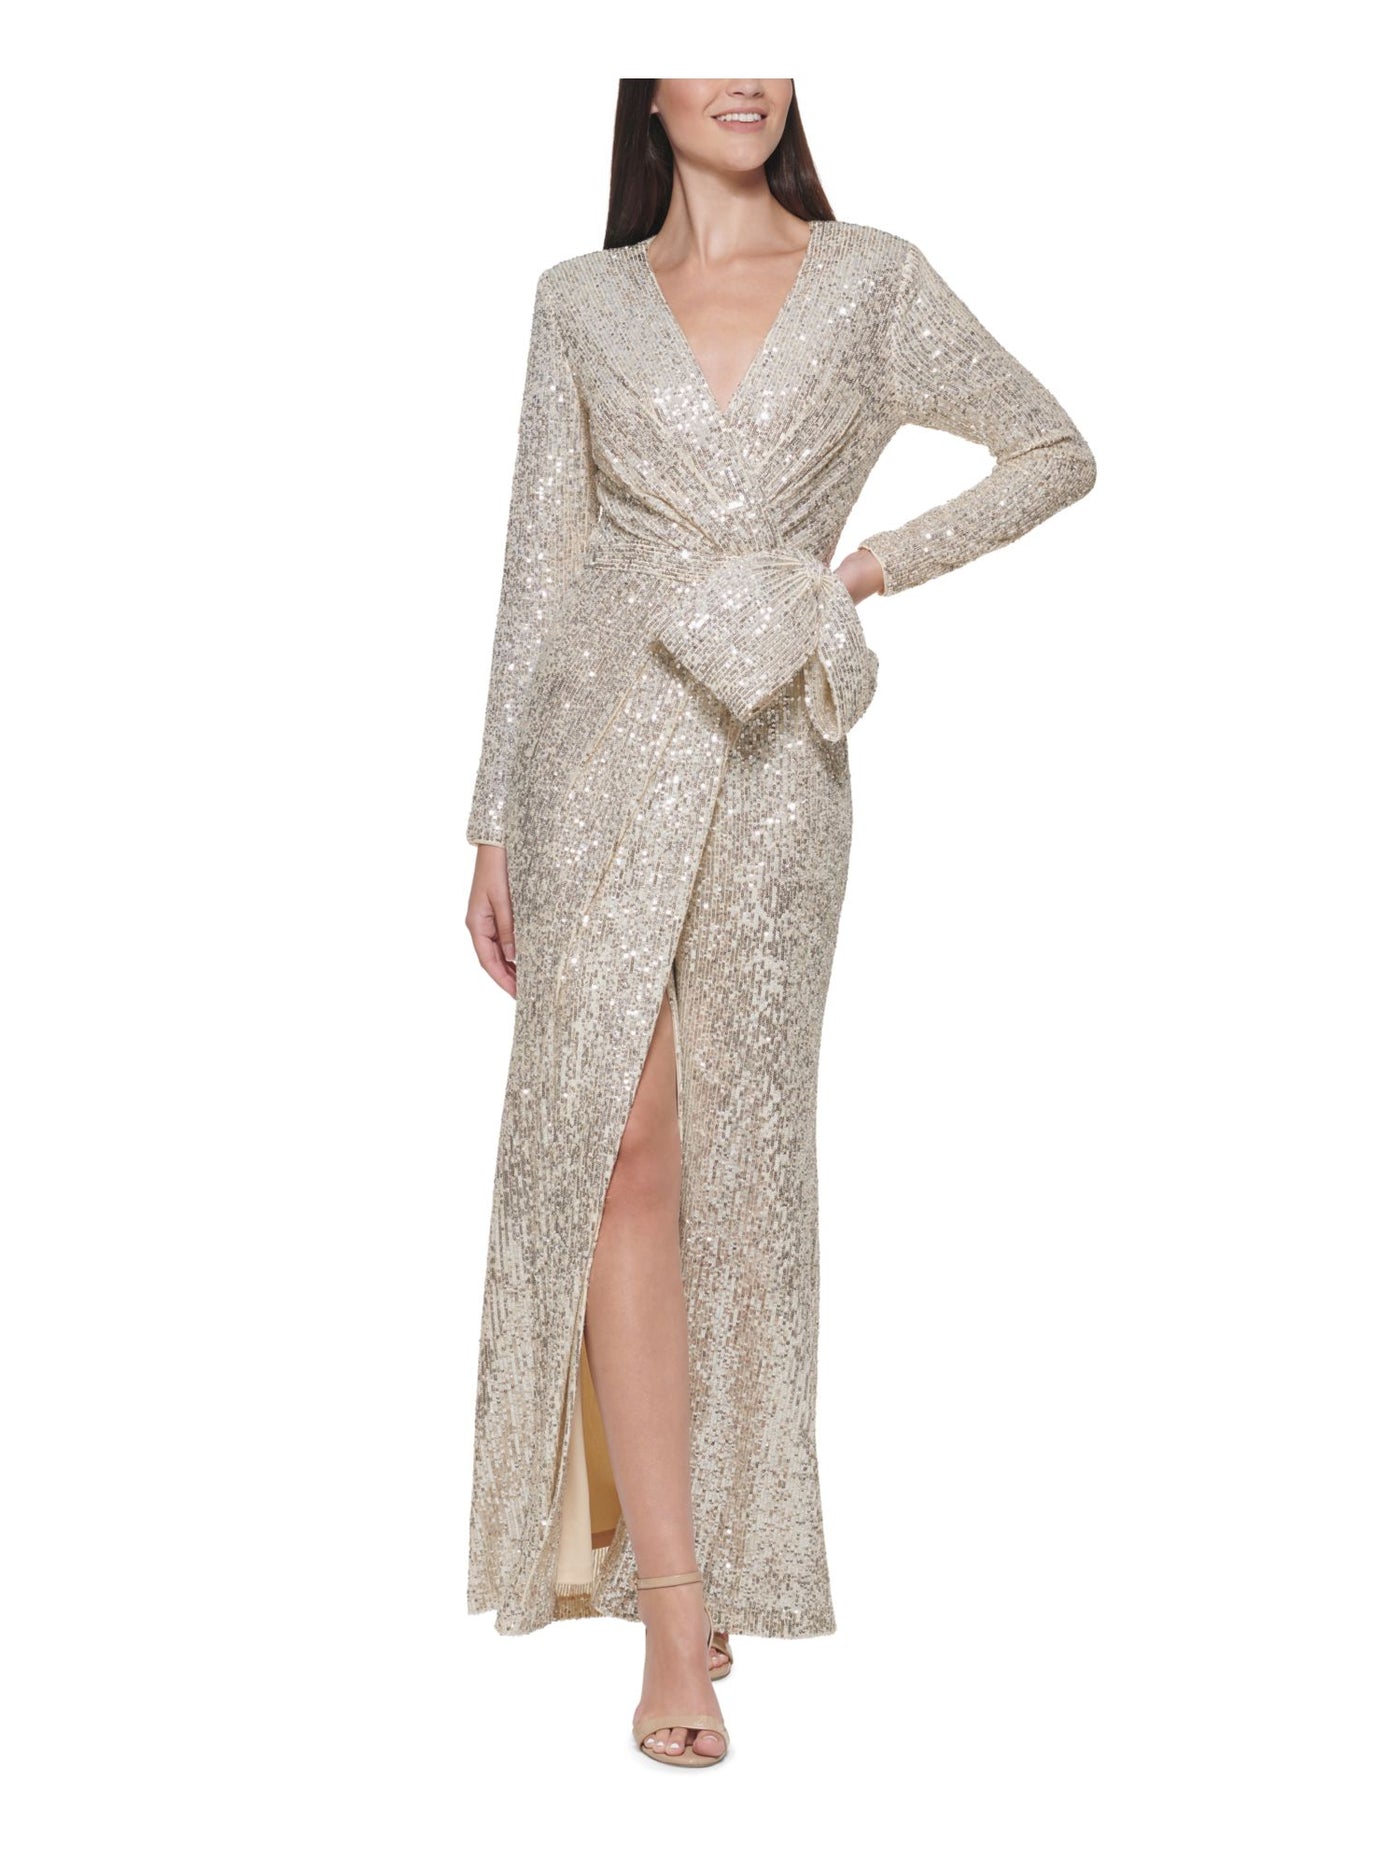 ELIZA J Womens Beige Sequined Slitted Bow Zippered Long Sleeve V Neck Tea-Length Evening Gown Dress Petites 12P